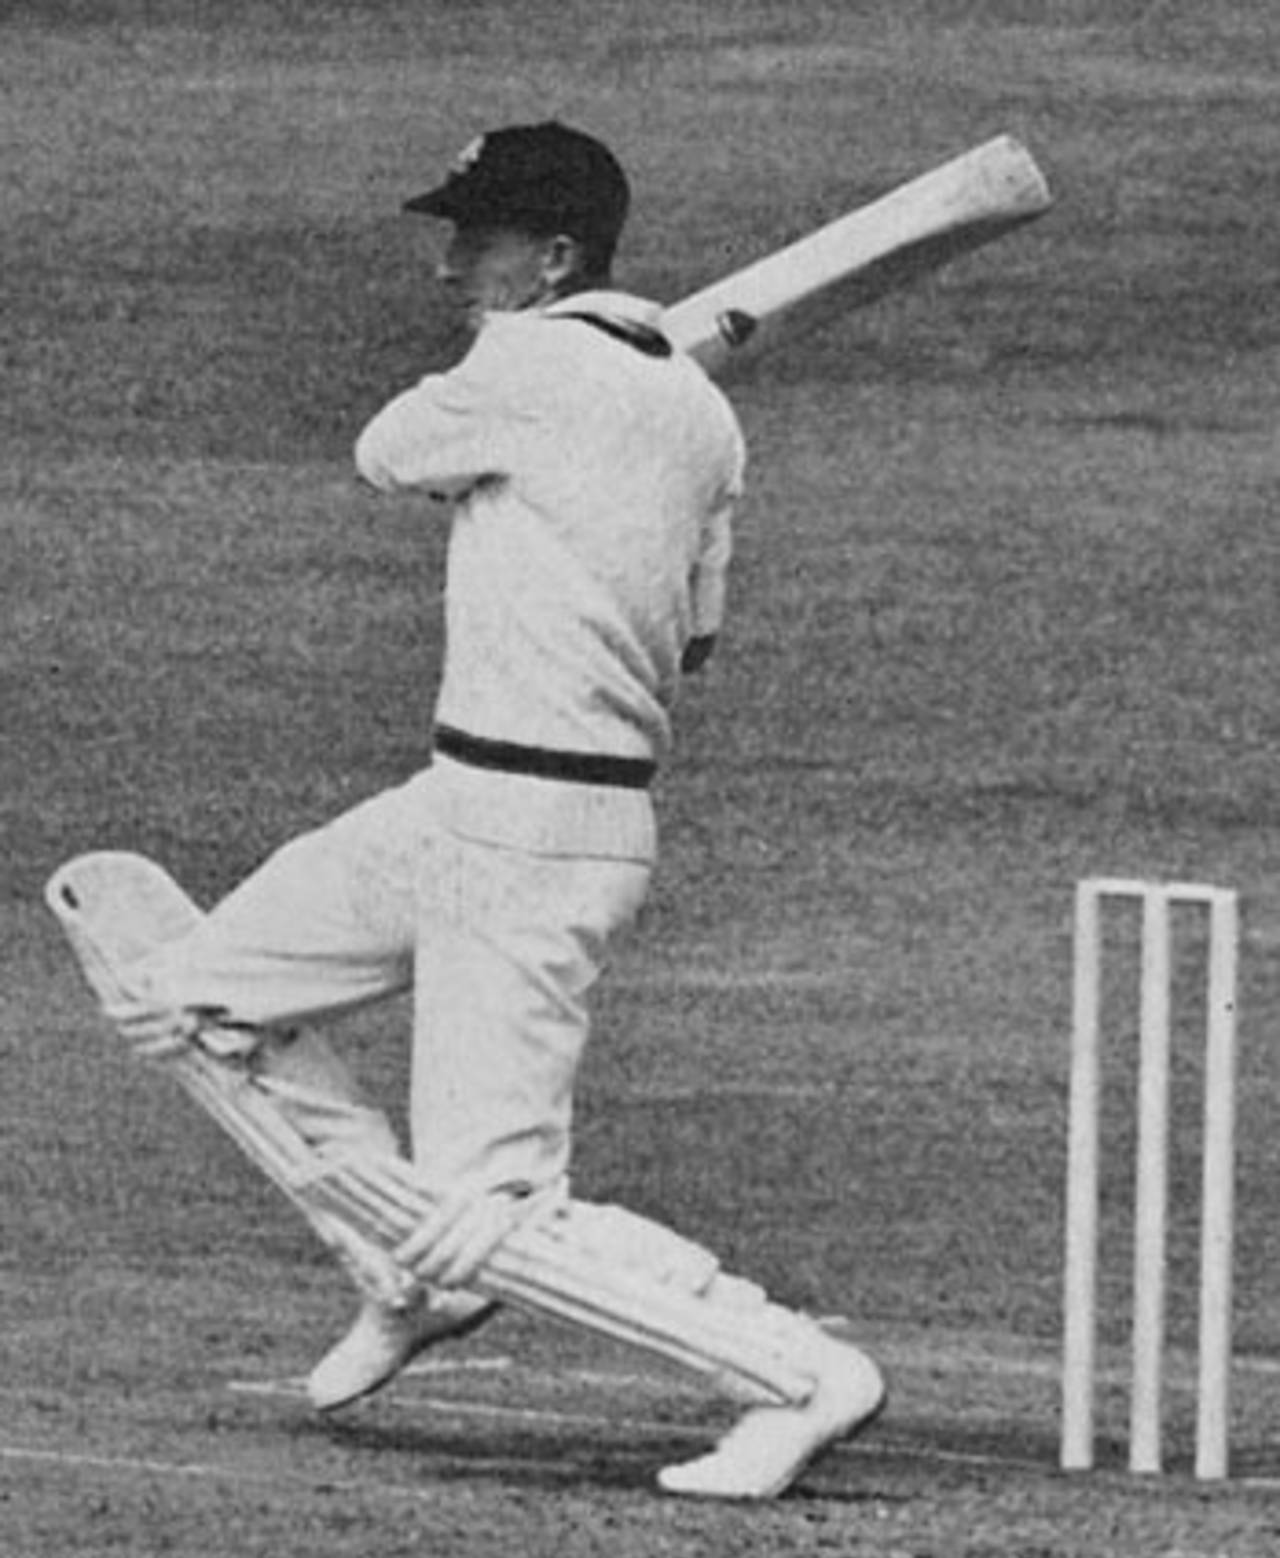 Bill Lawry hits out, England v Australia, Lord's, 1961